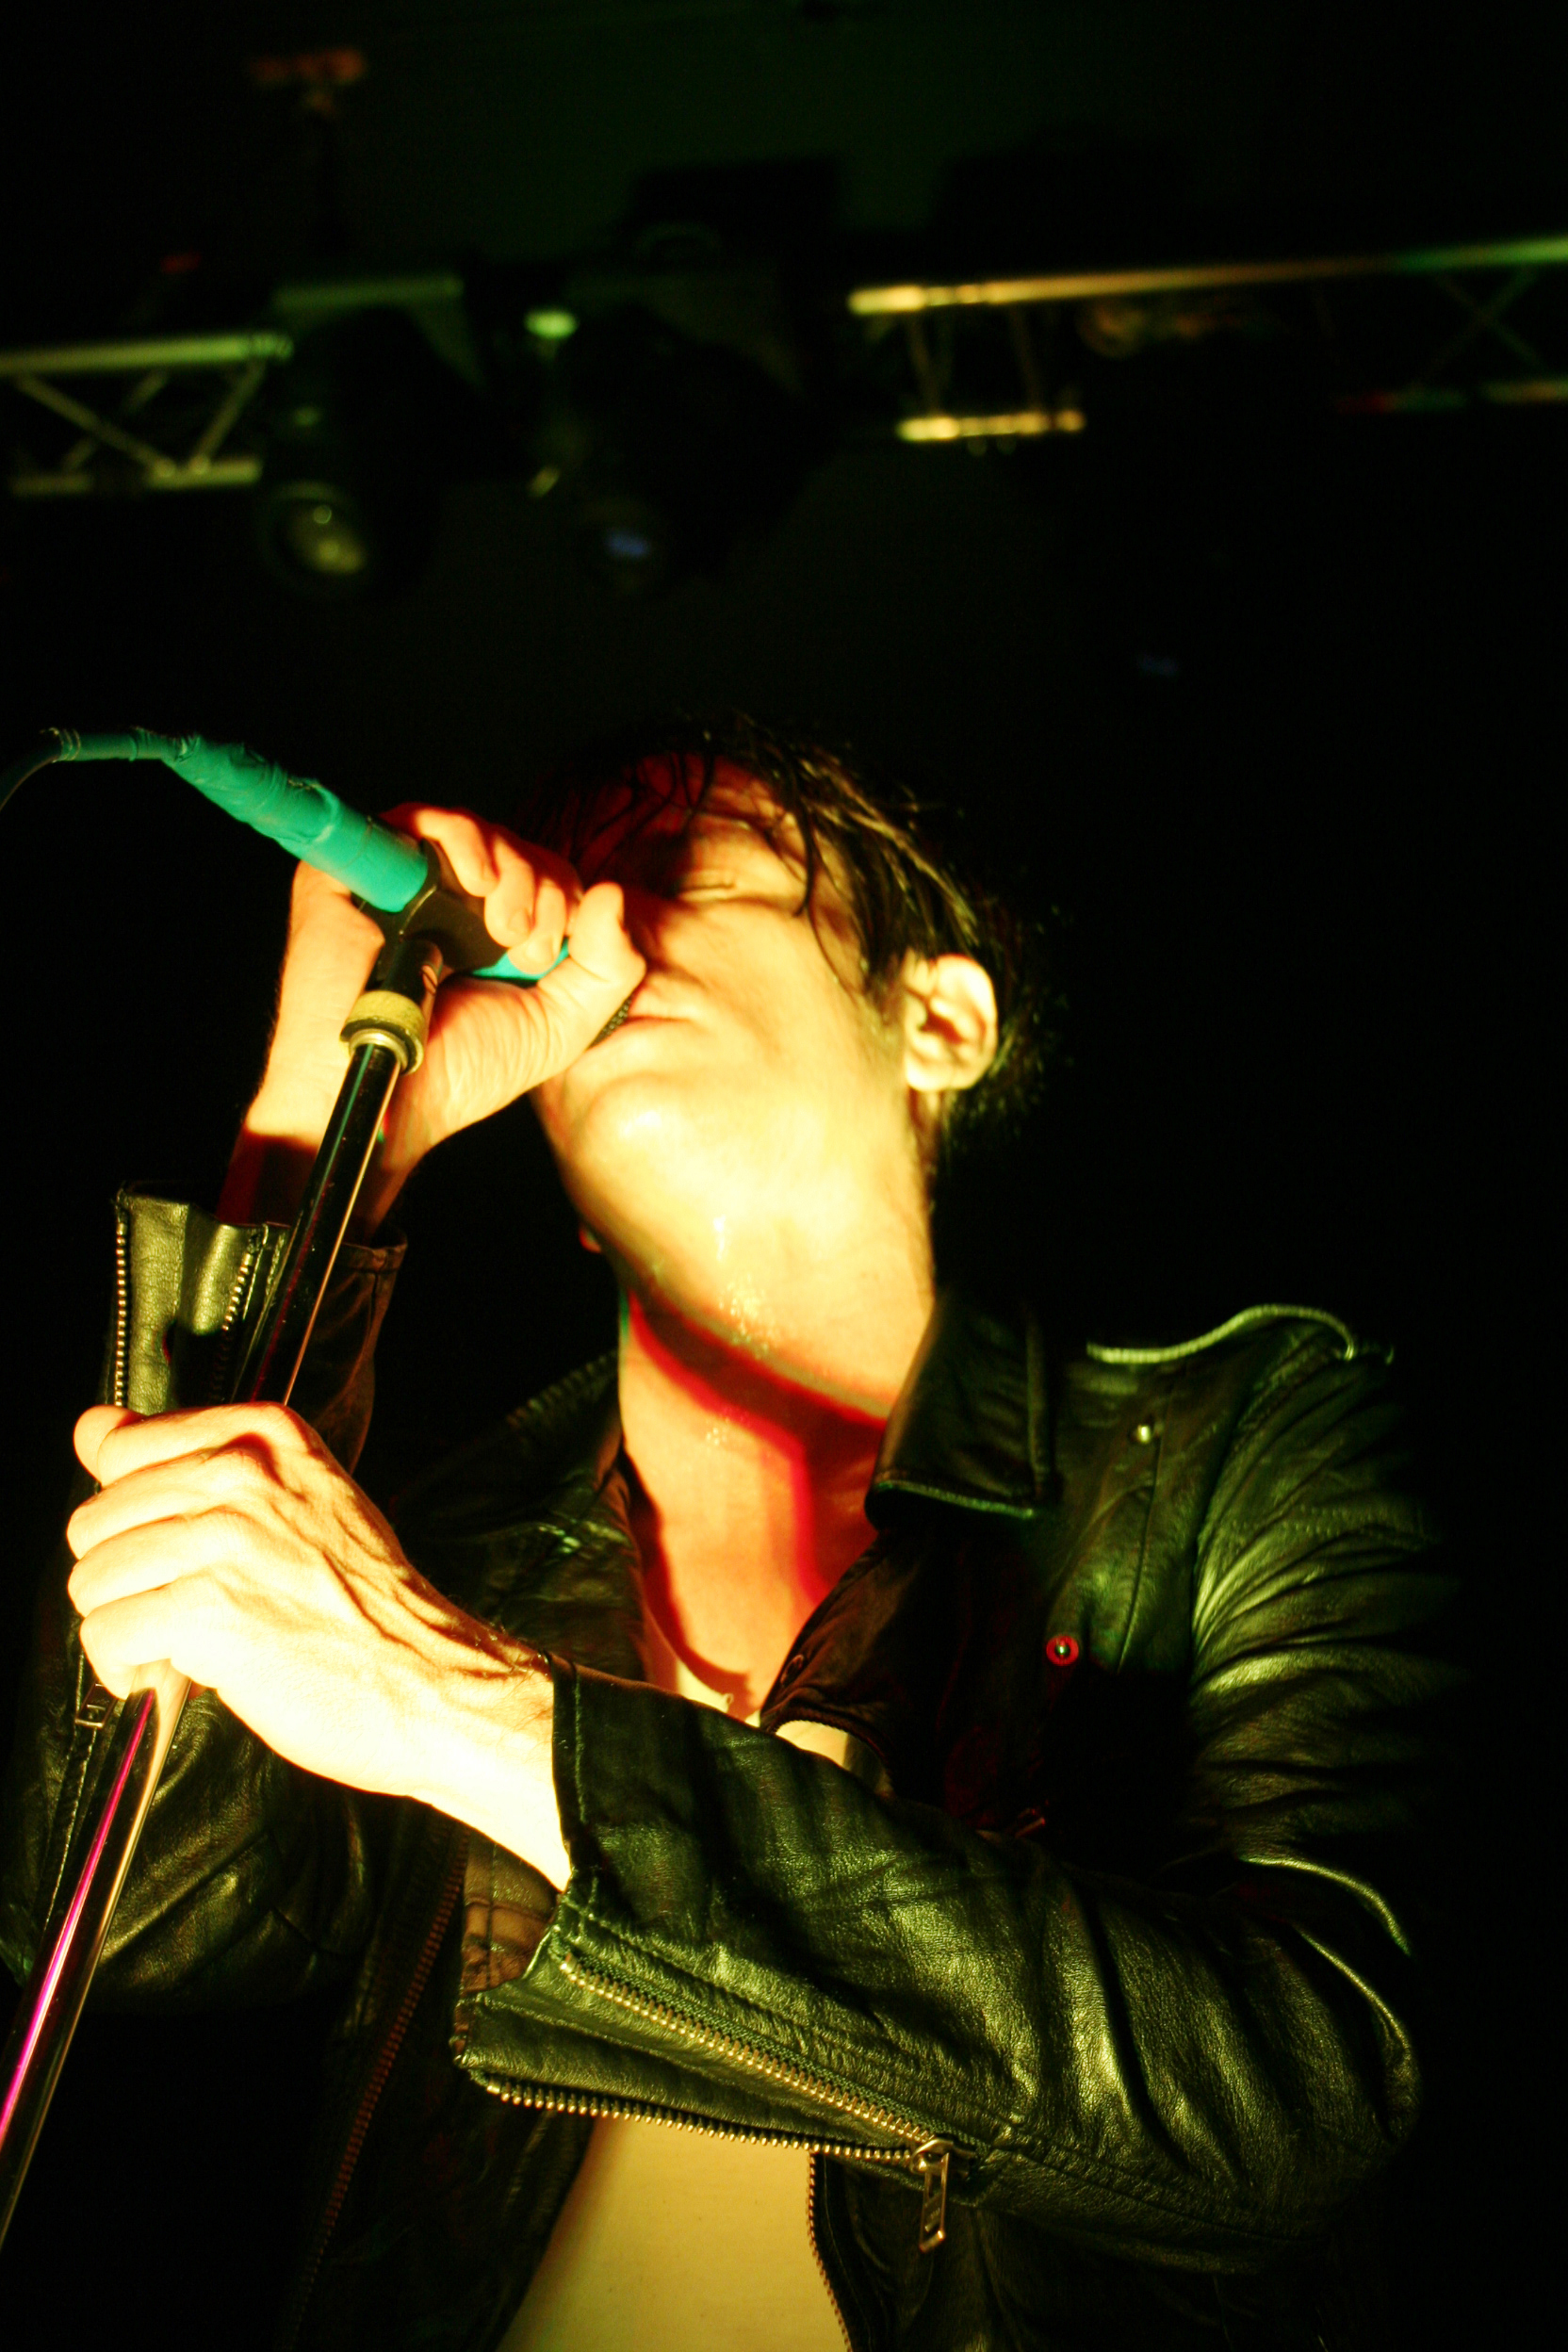 Lead Singer and Songwriter of the band Fun, Nate Ruess on stage